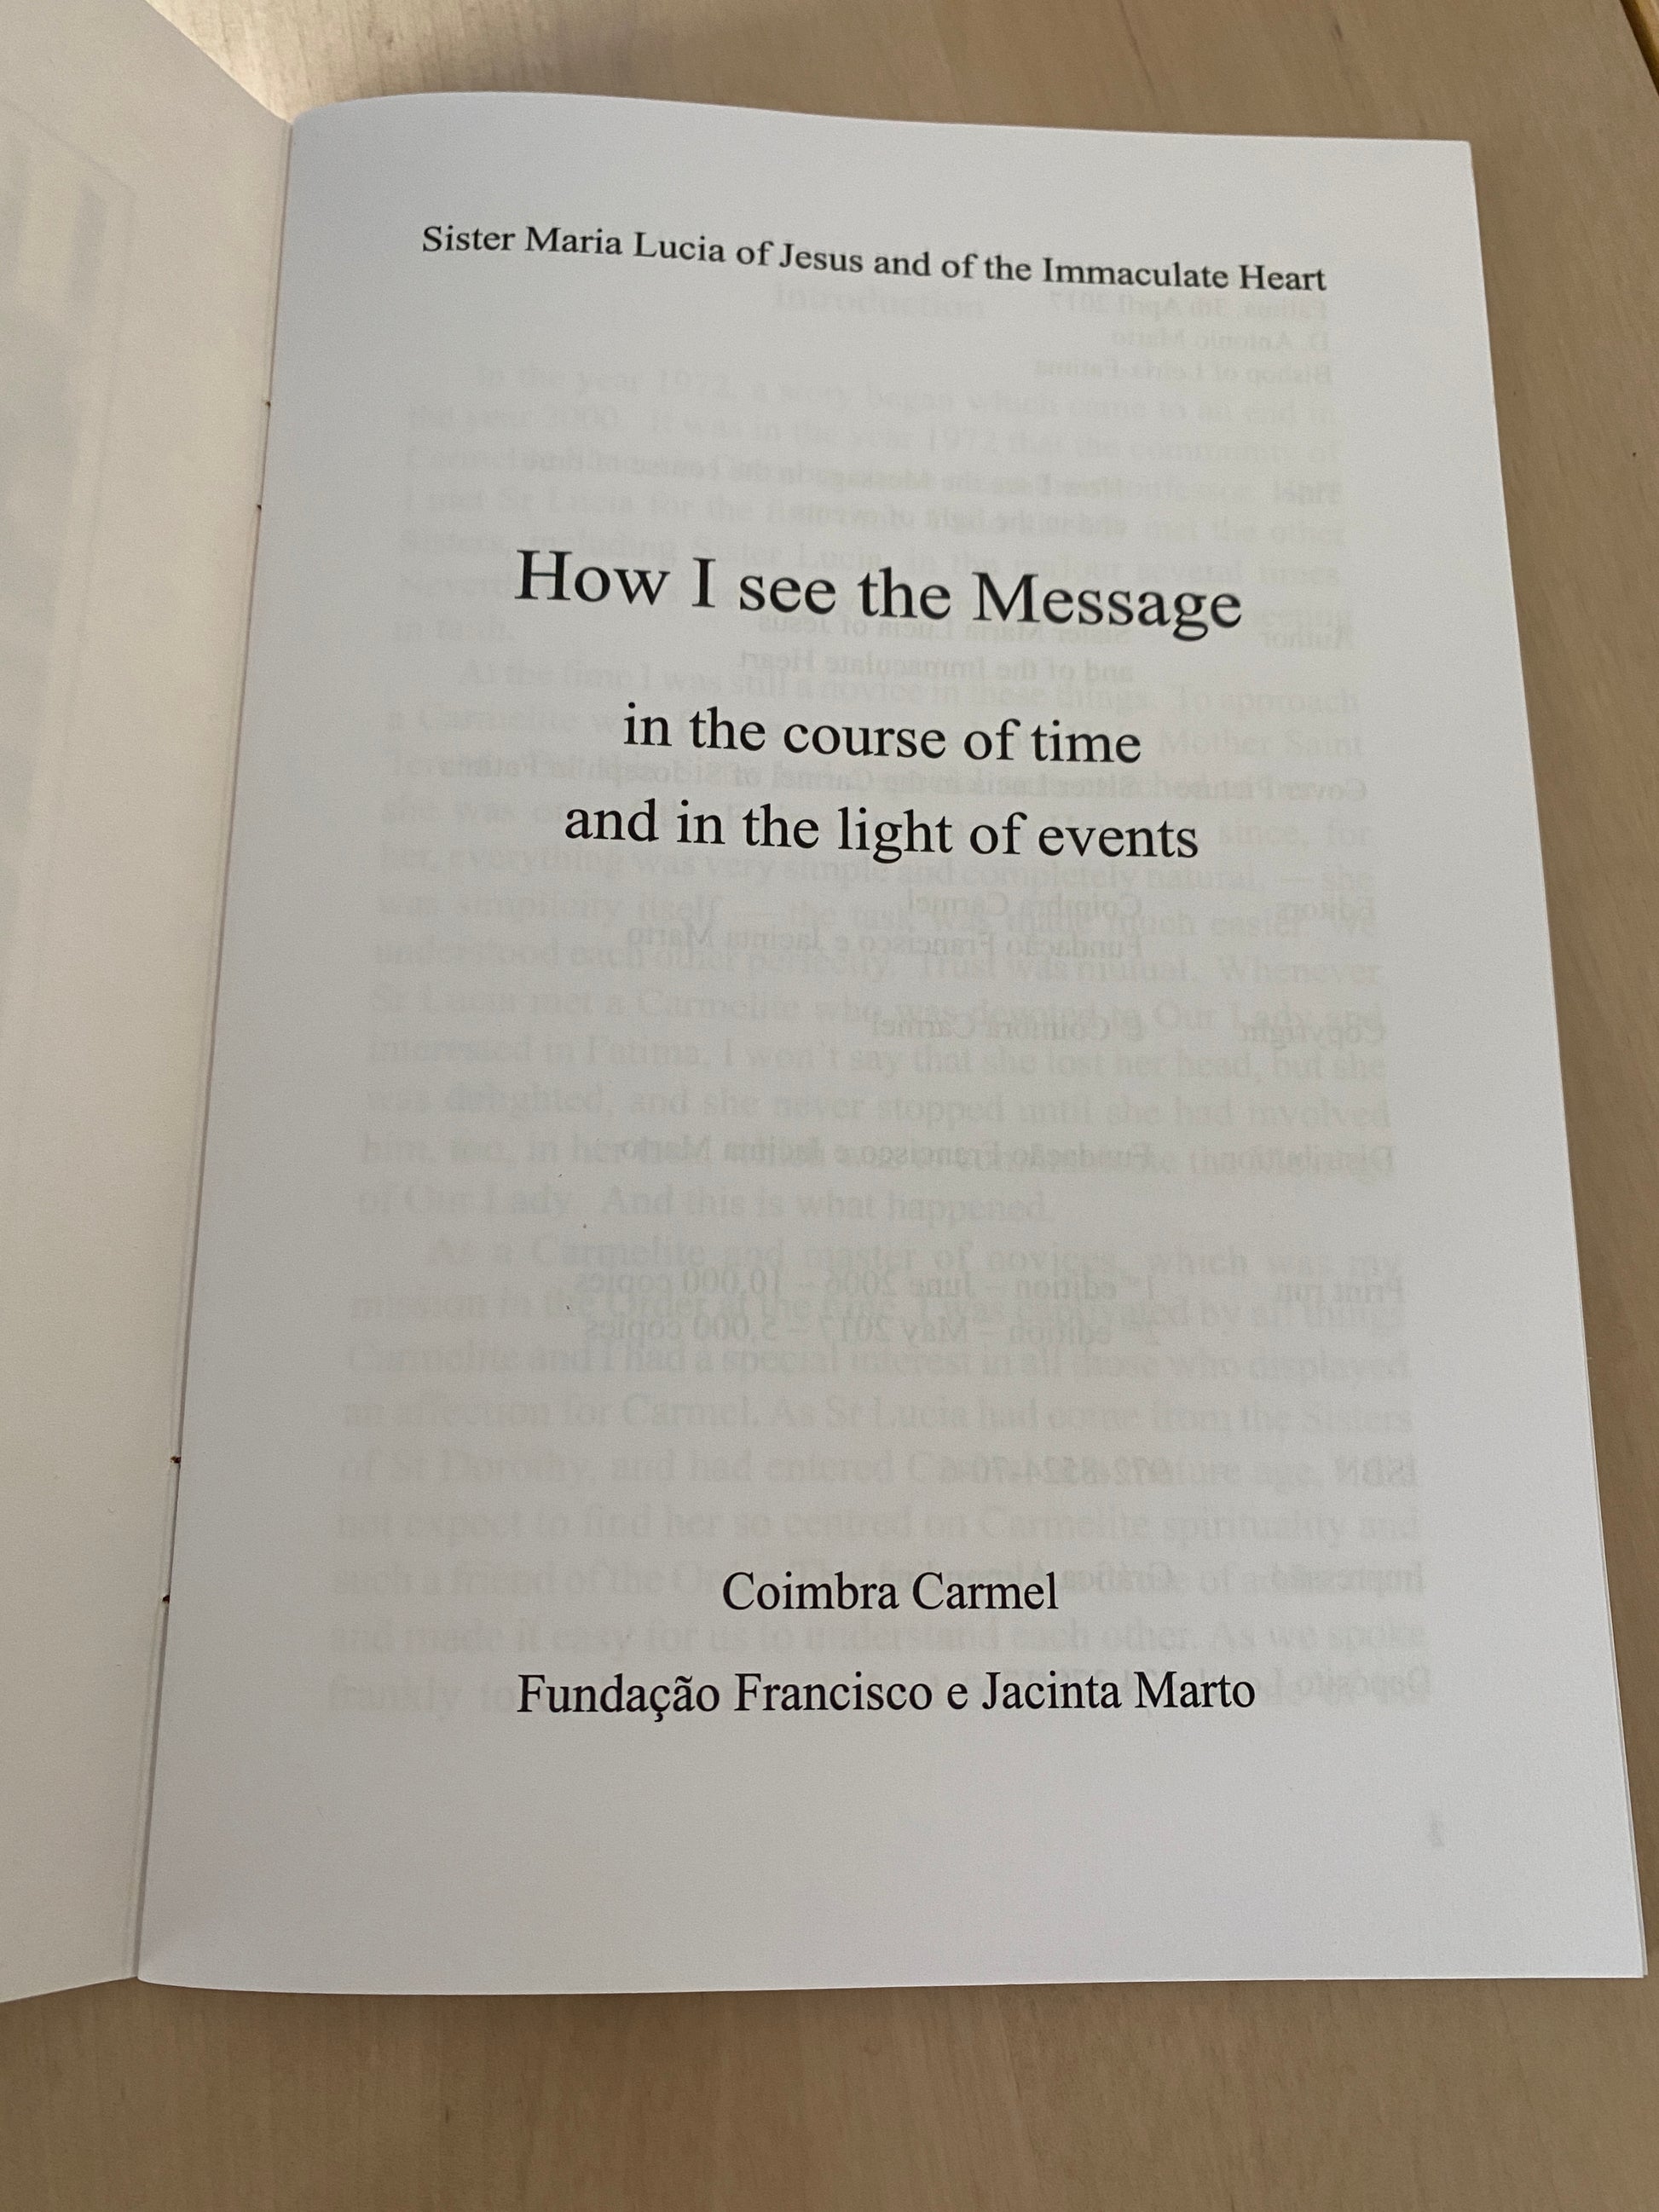 How I see the message book